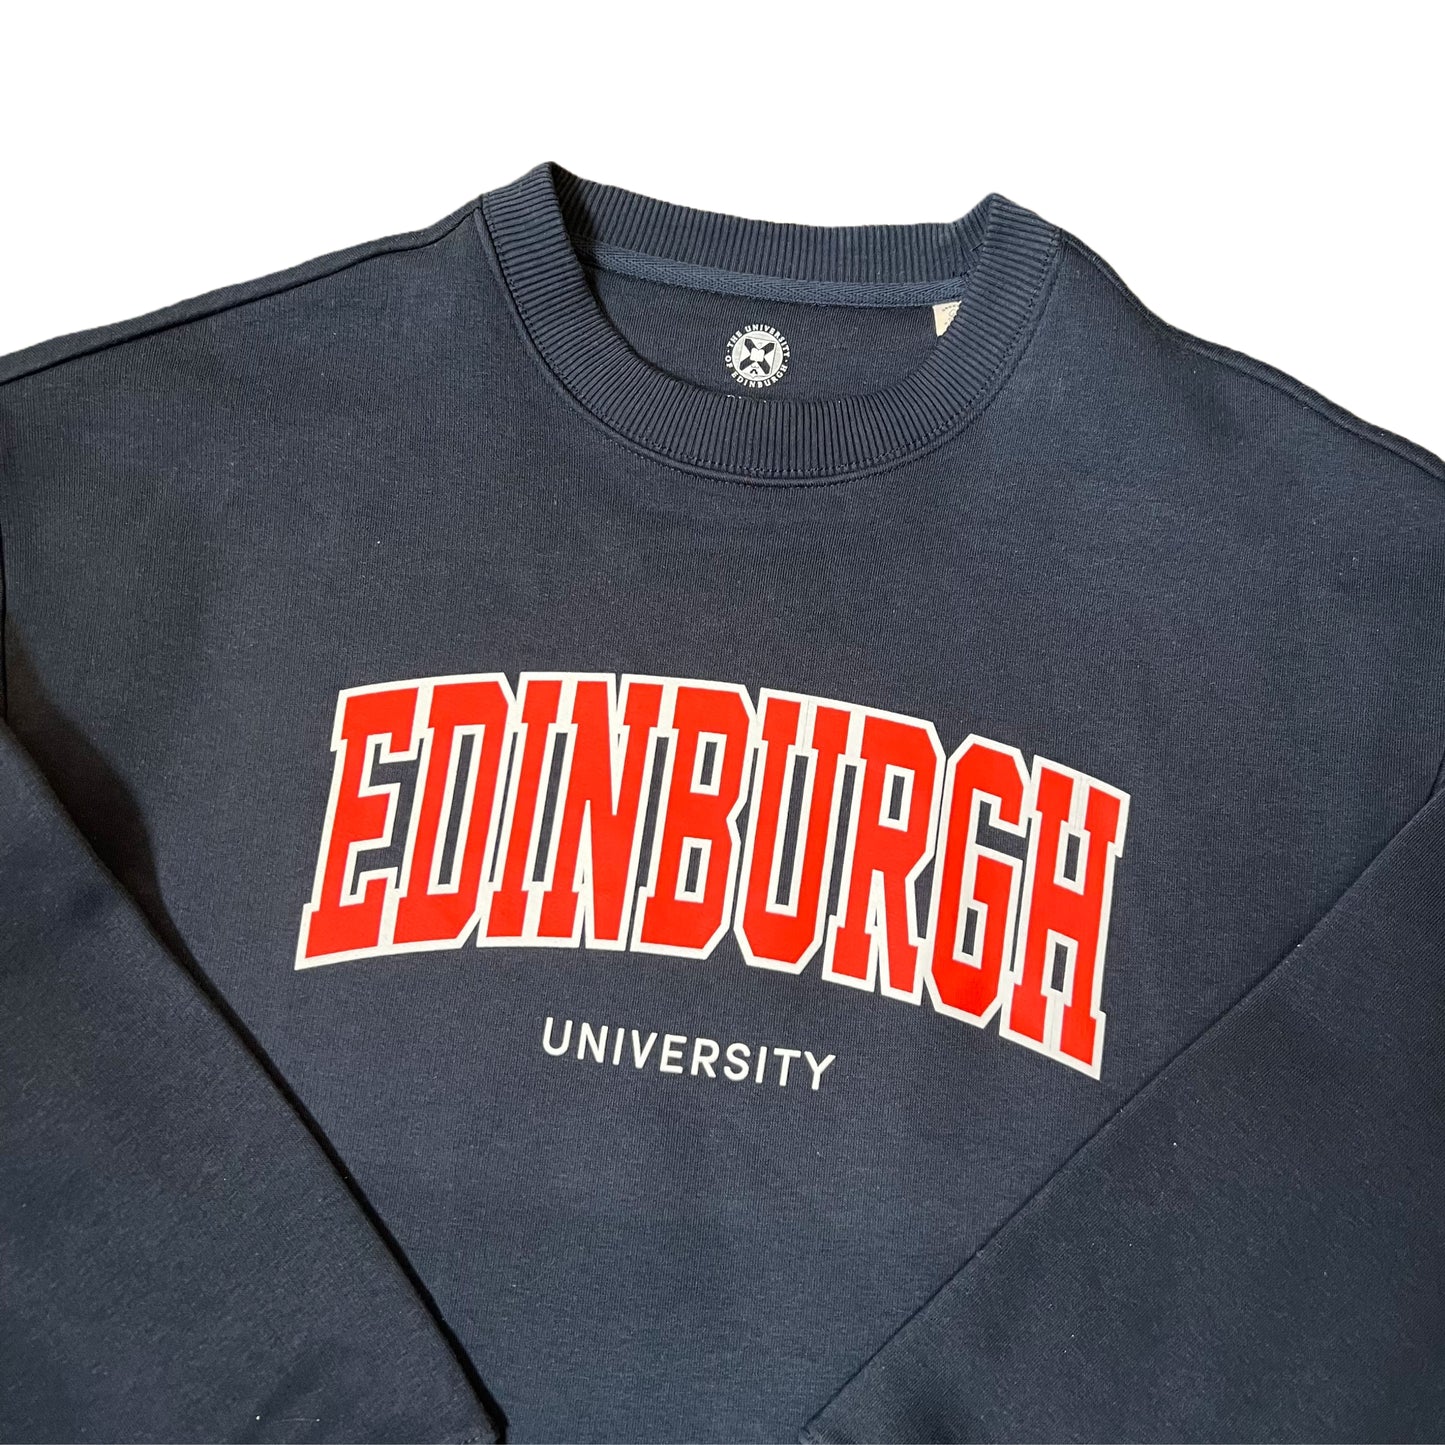 Close up of Navy sweatshirt with 'EDINBURGH UNIVERSITY' text in red and white